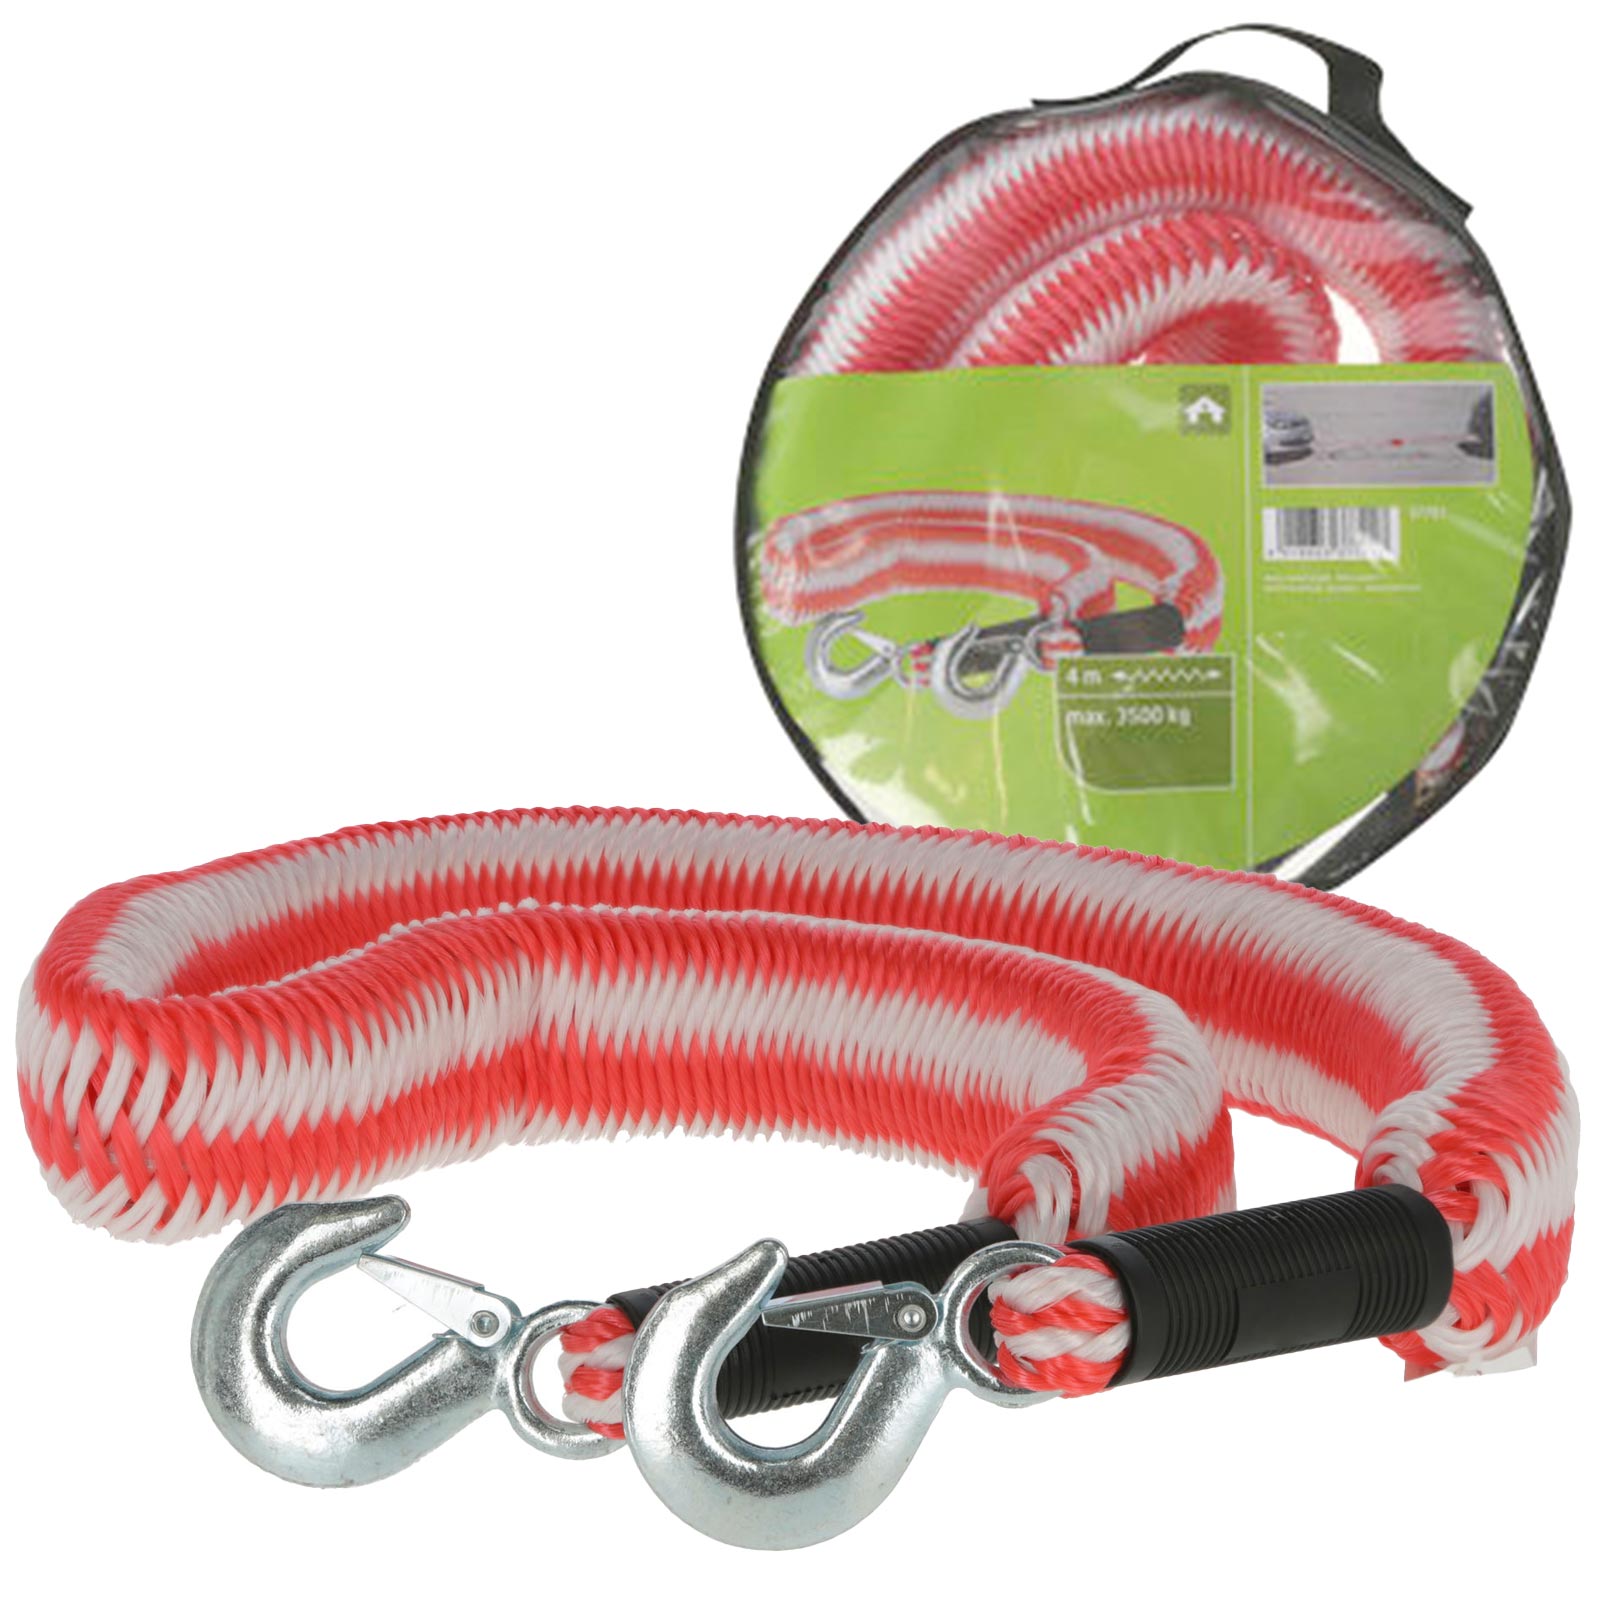 Towing rope elastic 4m, 3500kg, snap hook and flag